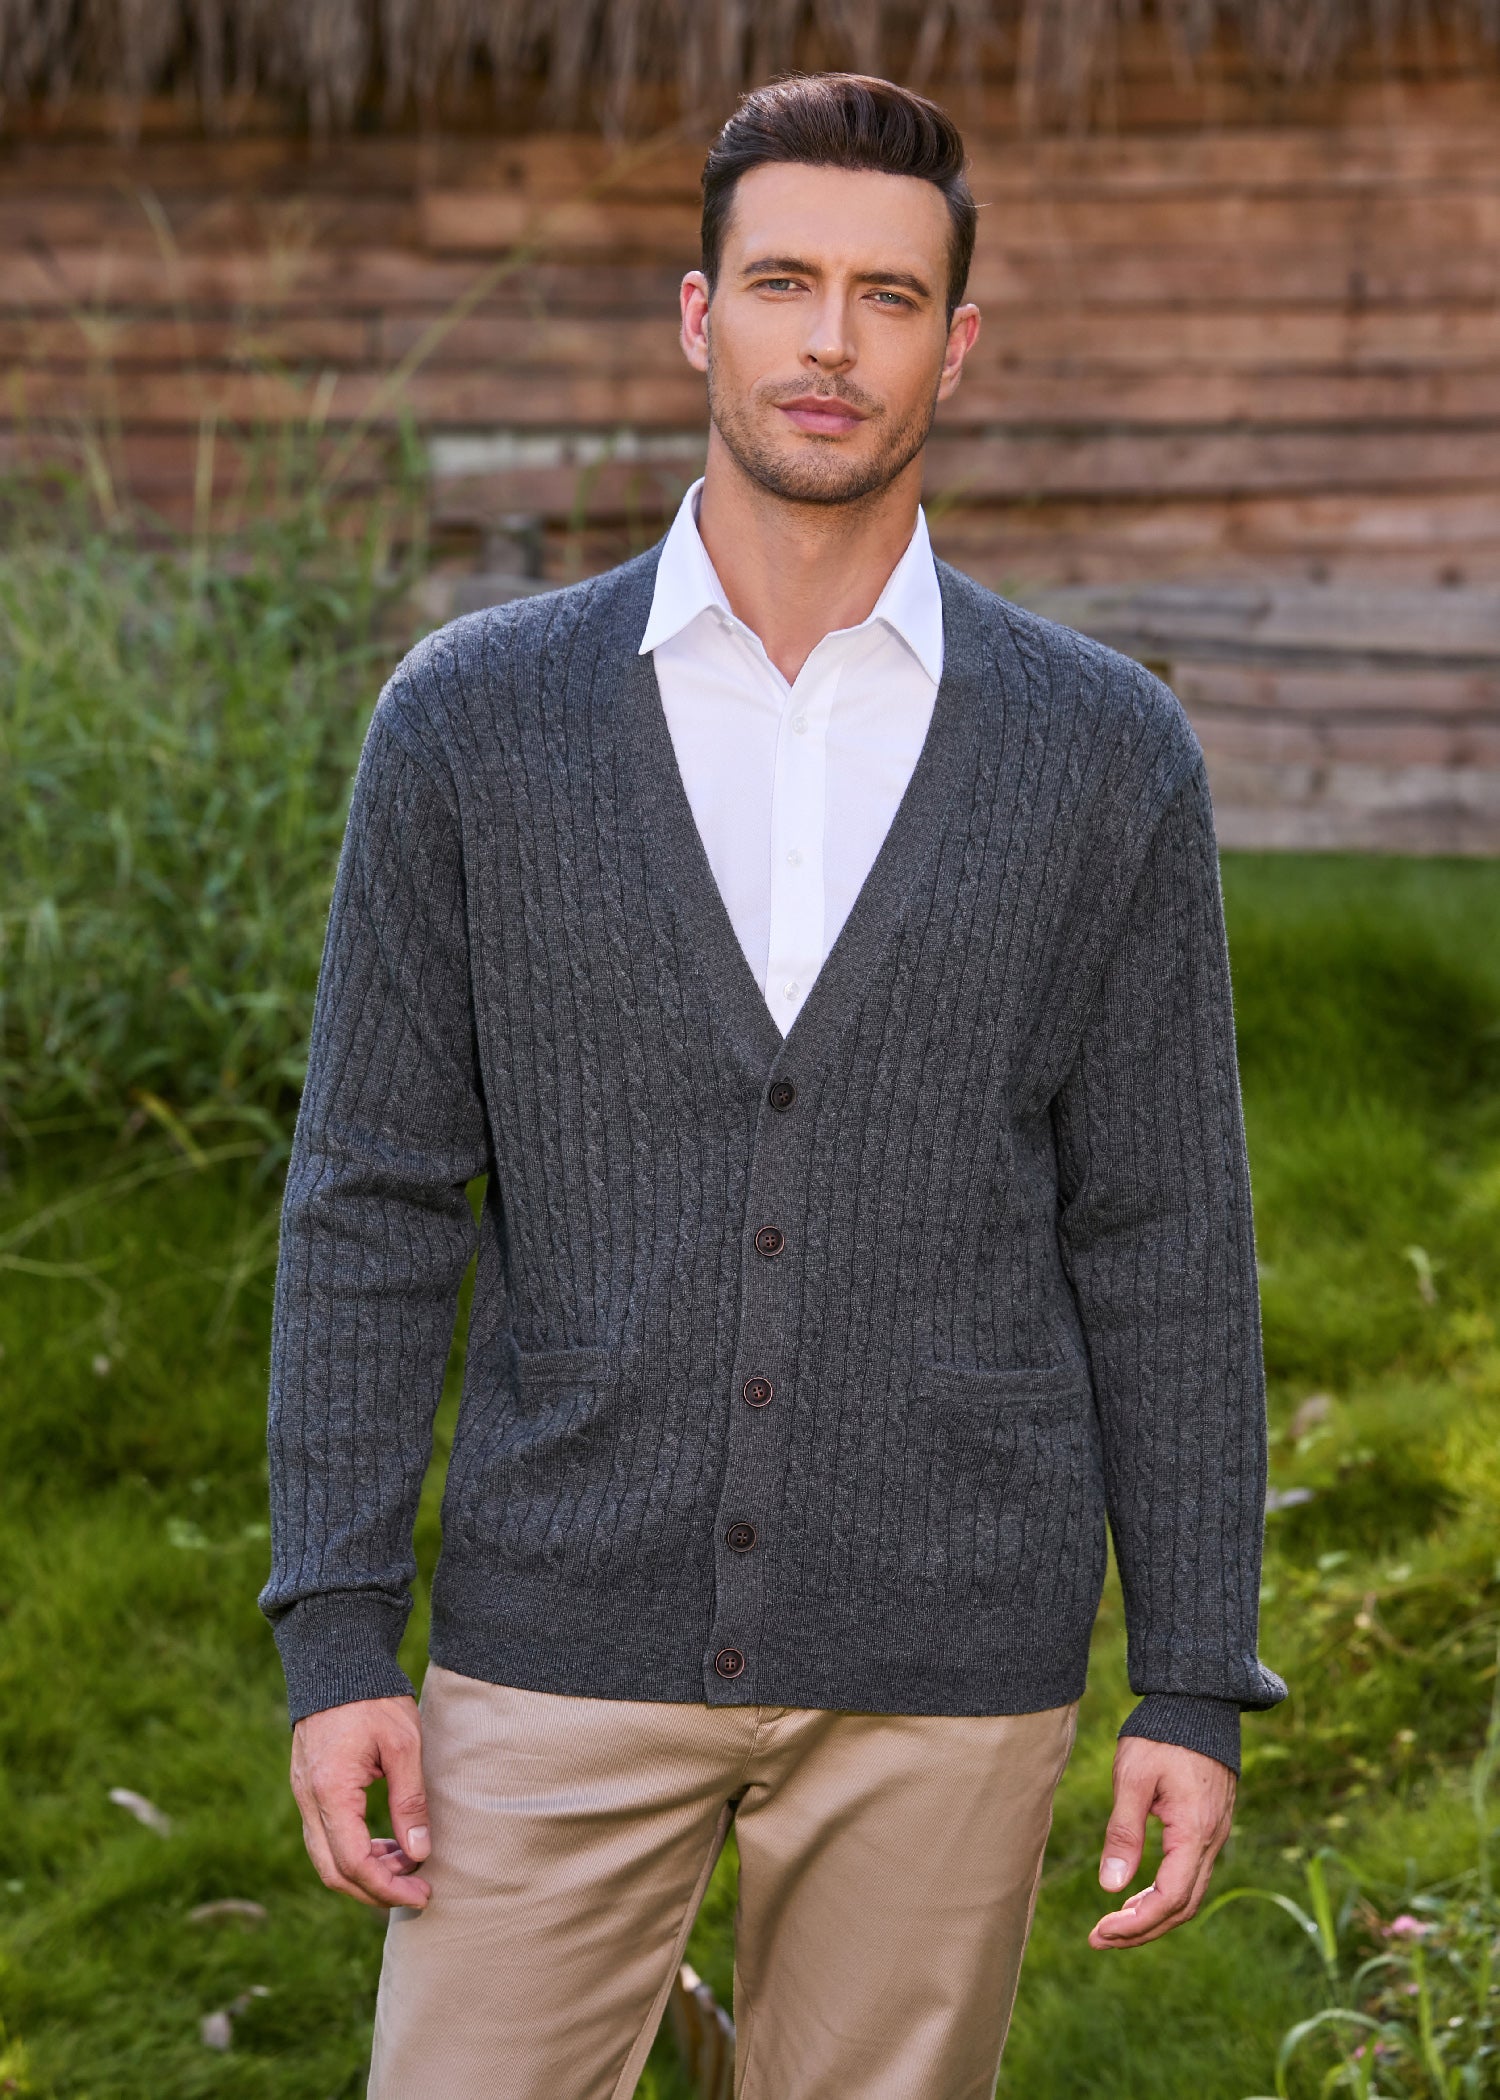 Men's knitwear: sweaters and cardigans